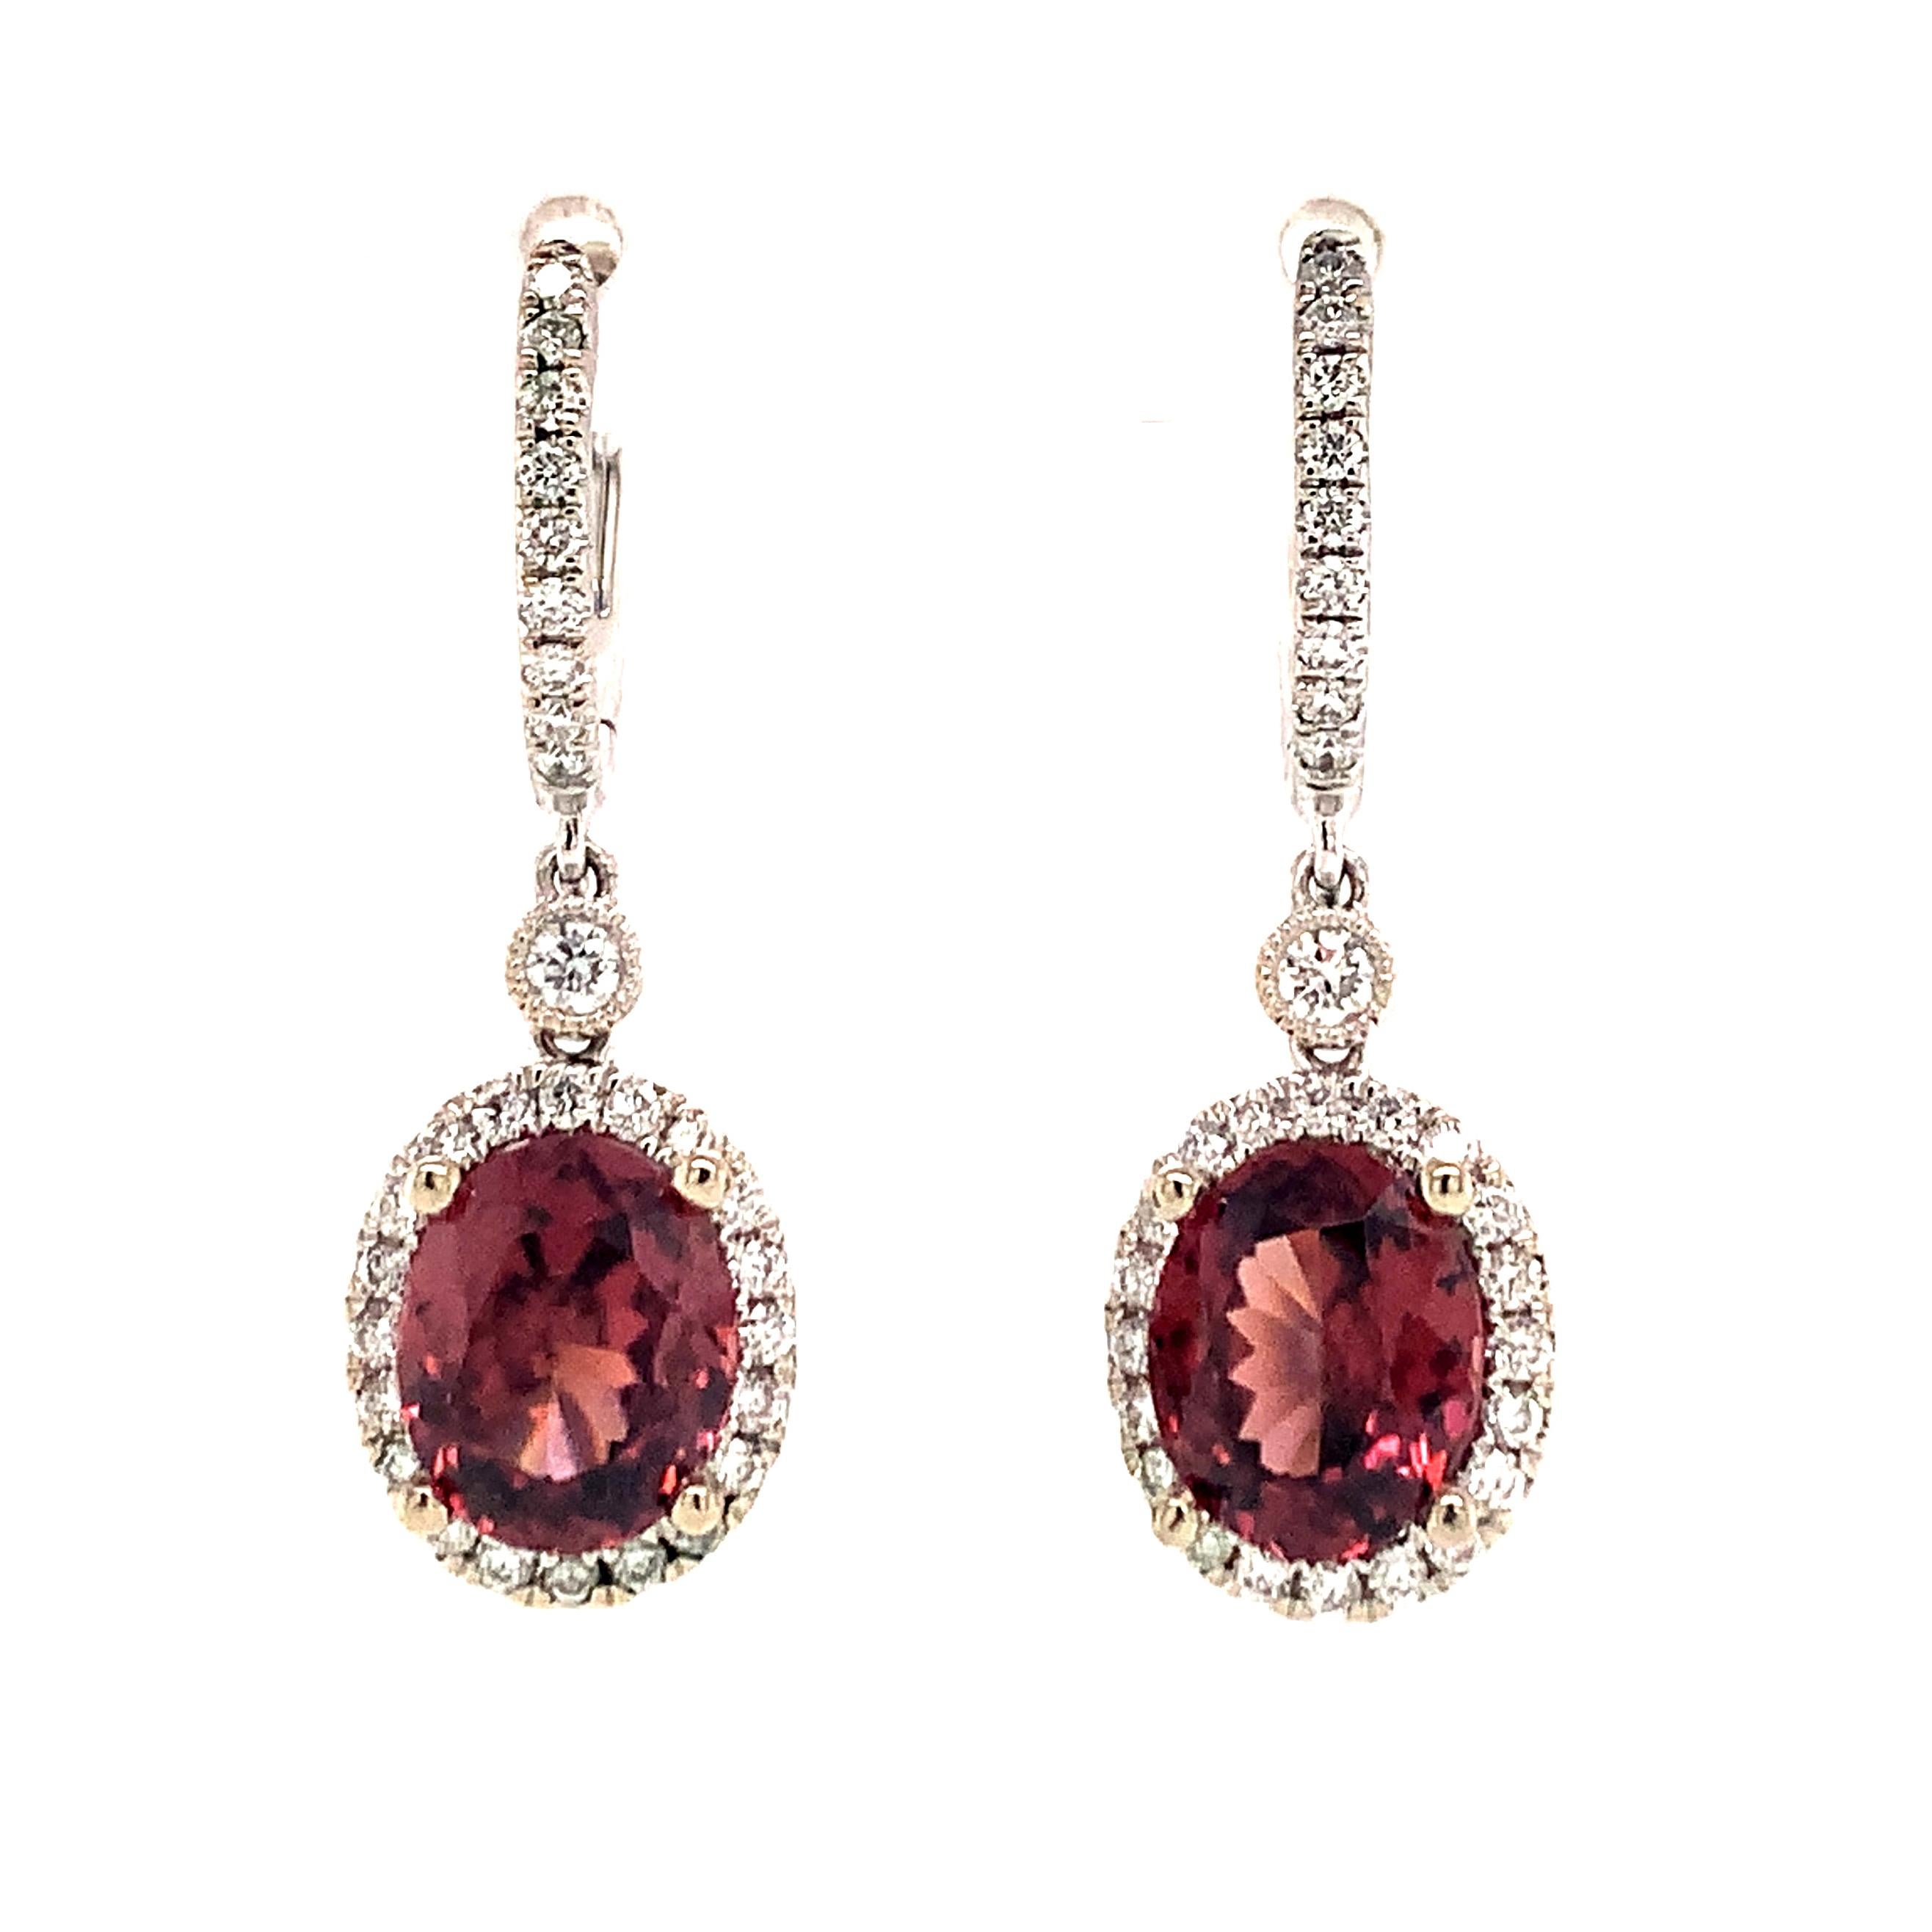 Natural Tourmaline Rubellite Diamond Earrings 18k Gold 6.62 TCW Certified For Sale 3